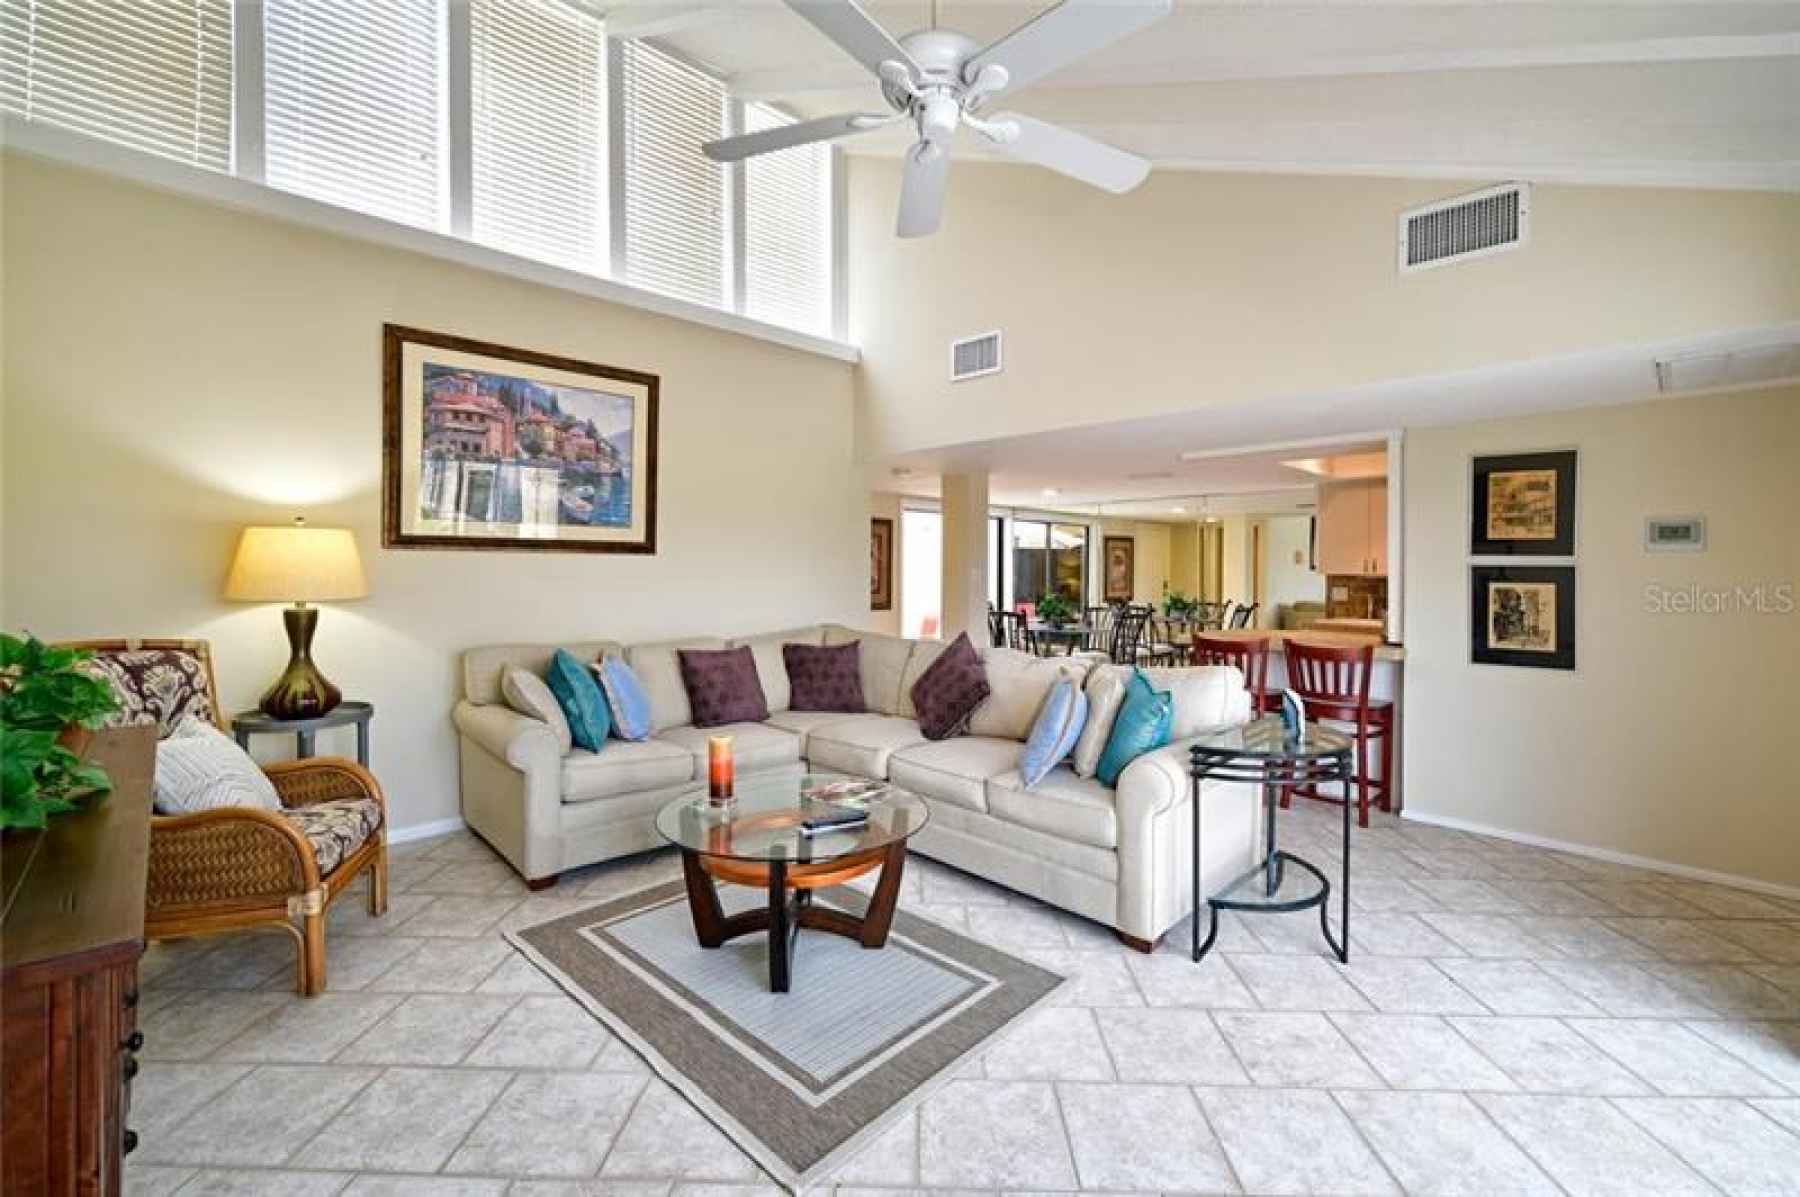 Furnished & Available for Immediate Occupancy! High Ceiling in the Living Room with Clearstory Windo